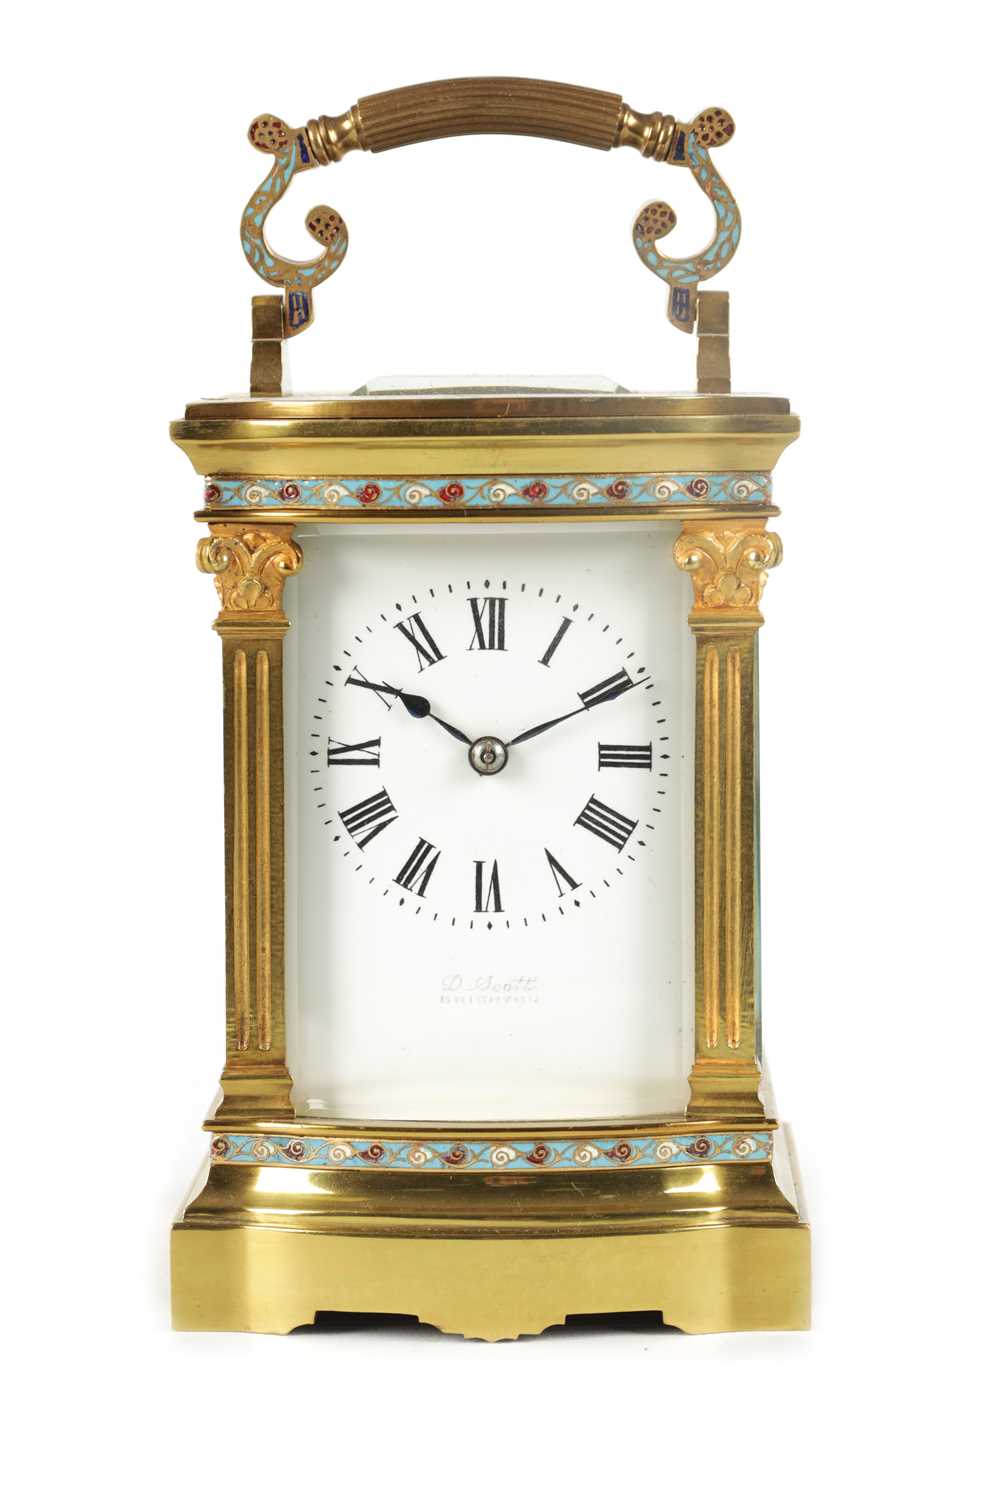 A LATE 19TH CENTURY FRENCH CHAMPLEVE ENAMEL STRIKING CARRIAGE CLOCK